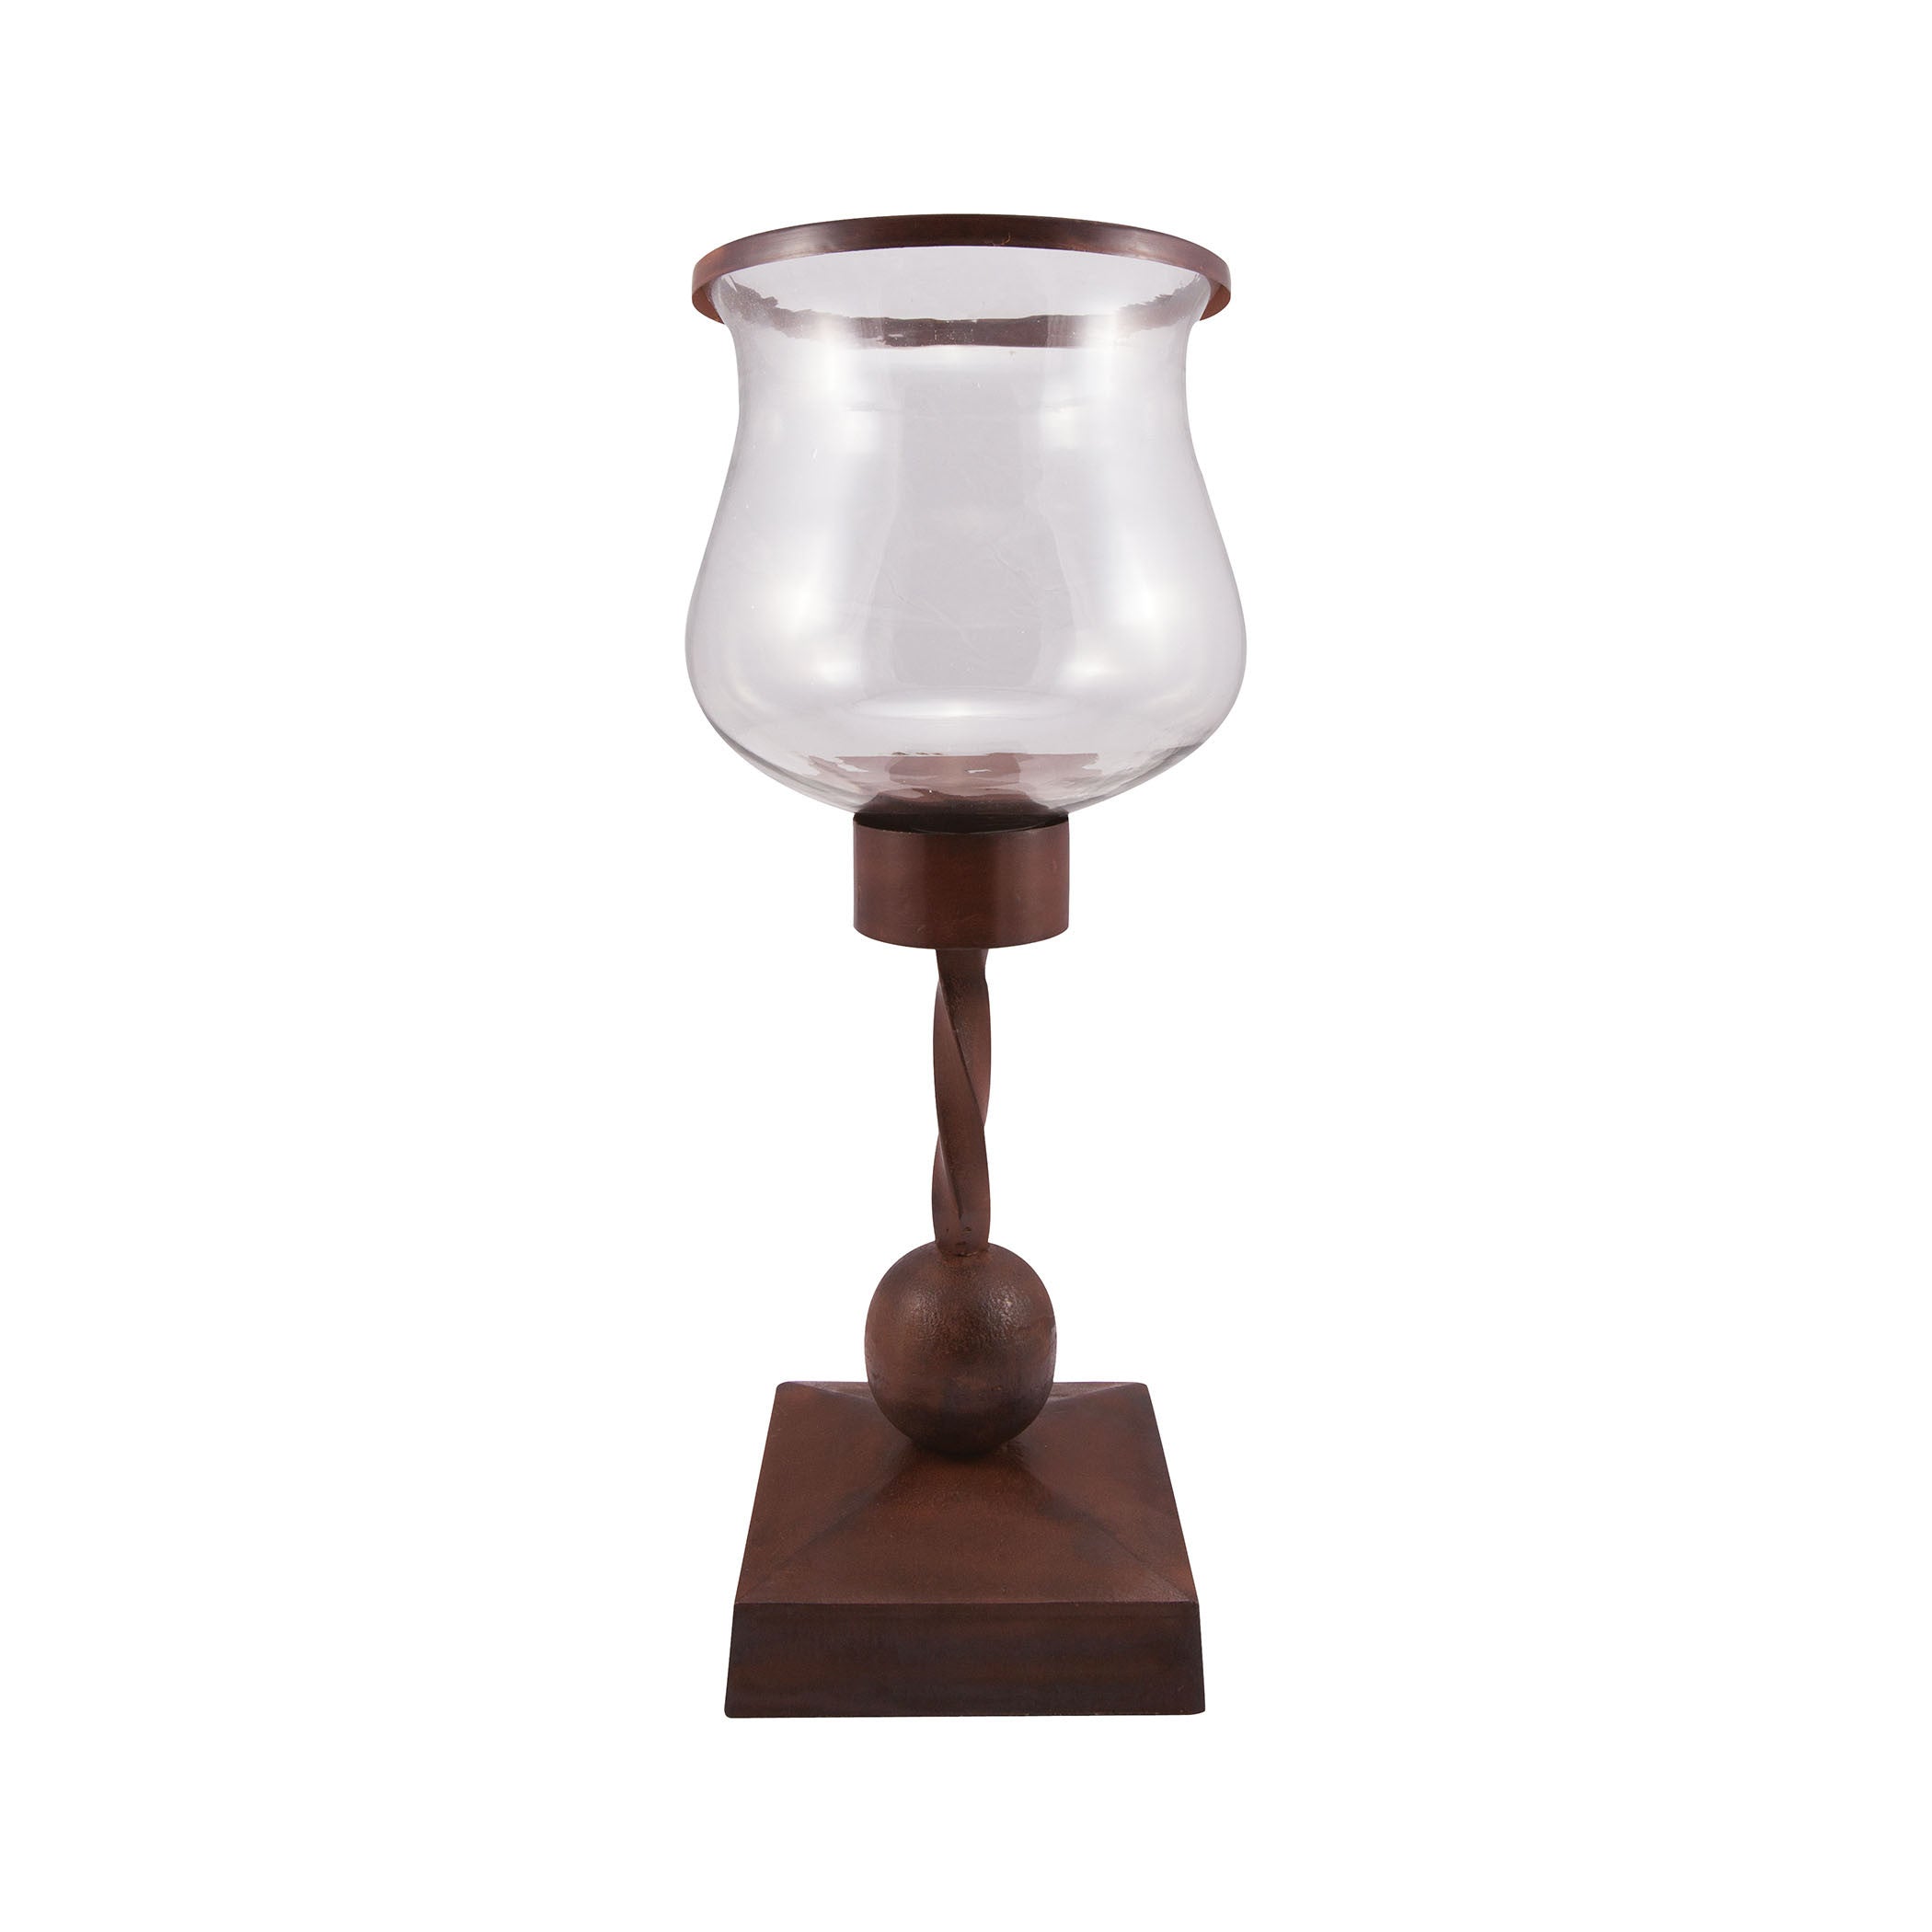 Pomeroy Pom-621345 Mirebella Collection Montana Rustic,clear Finish Candle/candle Holder